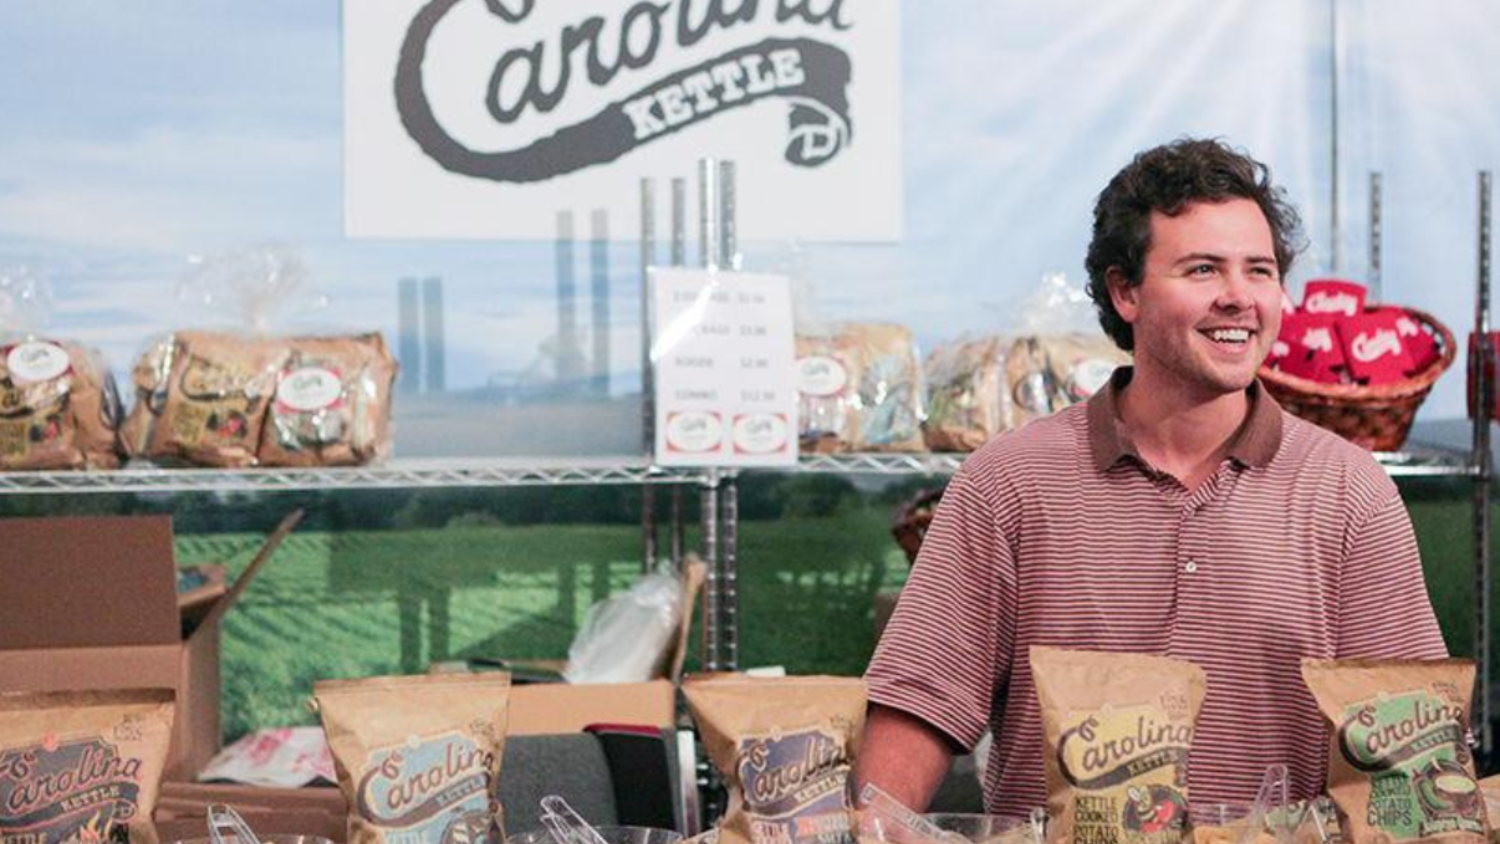 Josh Monahan with bags of Carolina Kettle Chips